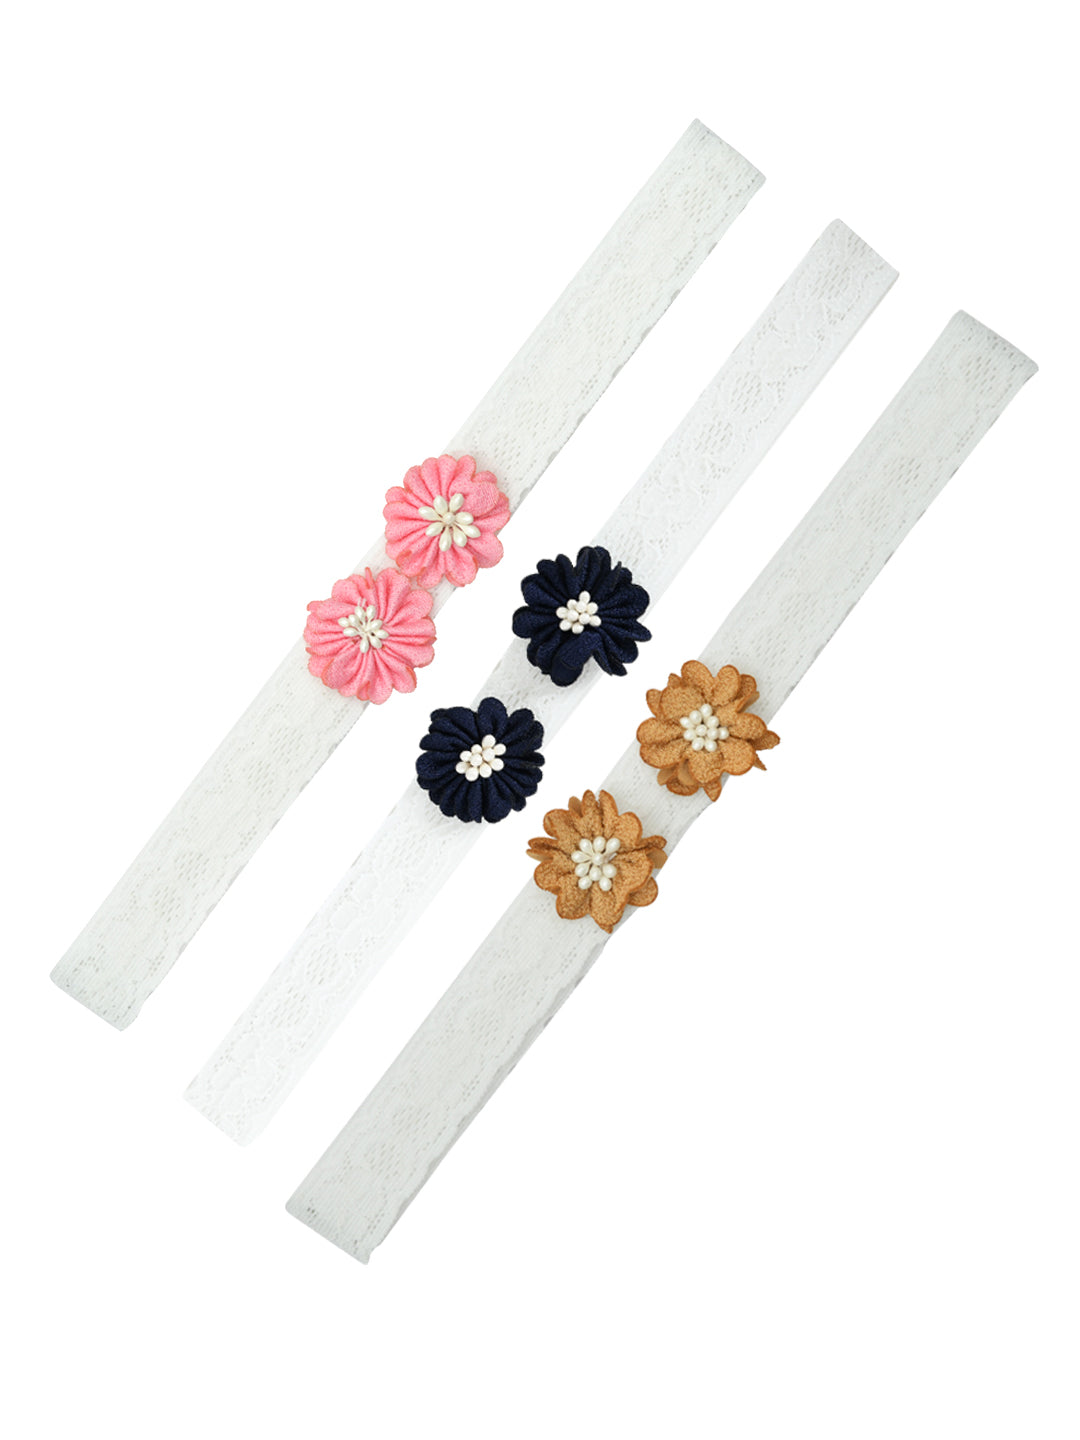 Pack of 3 White Daisy Floral Headbands for Baby Girl